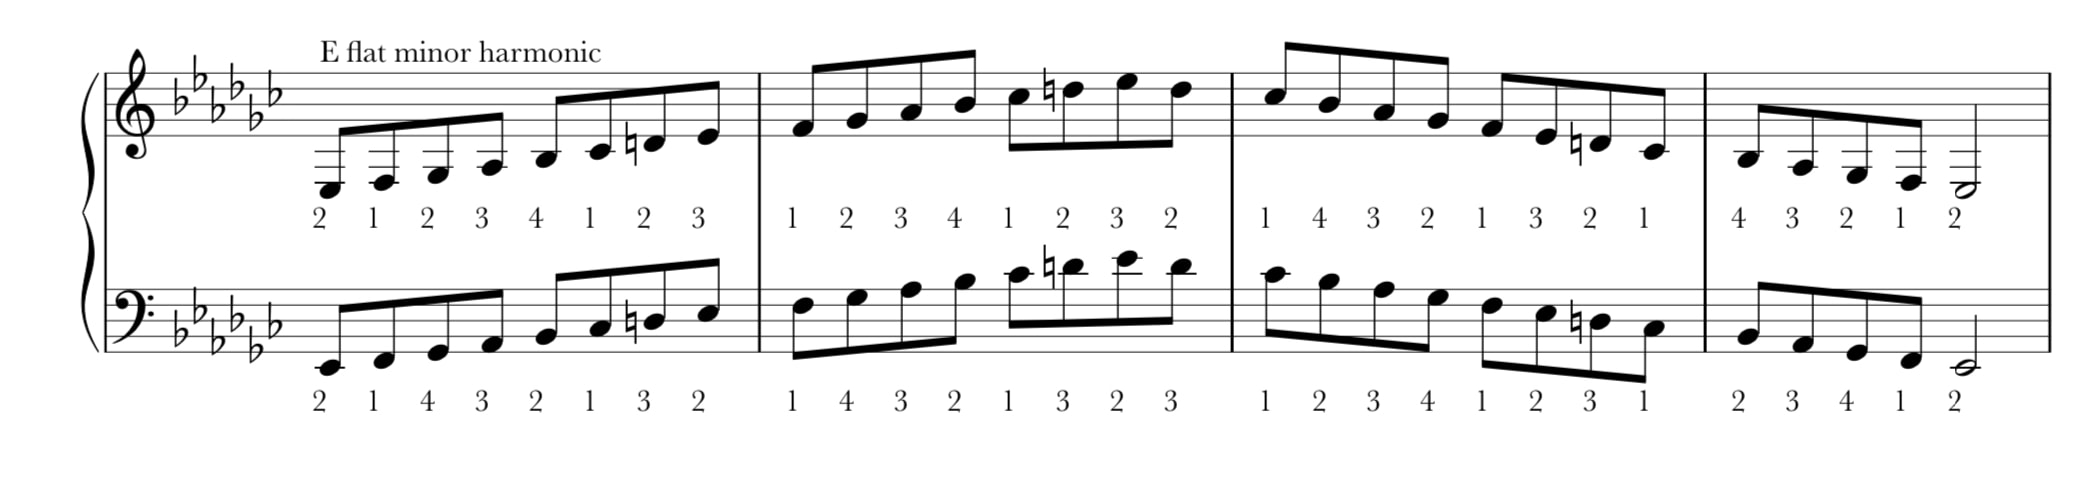 minor scale with a flat b flat d flat and e flat